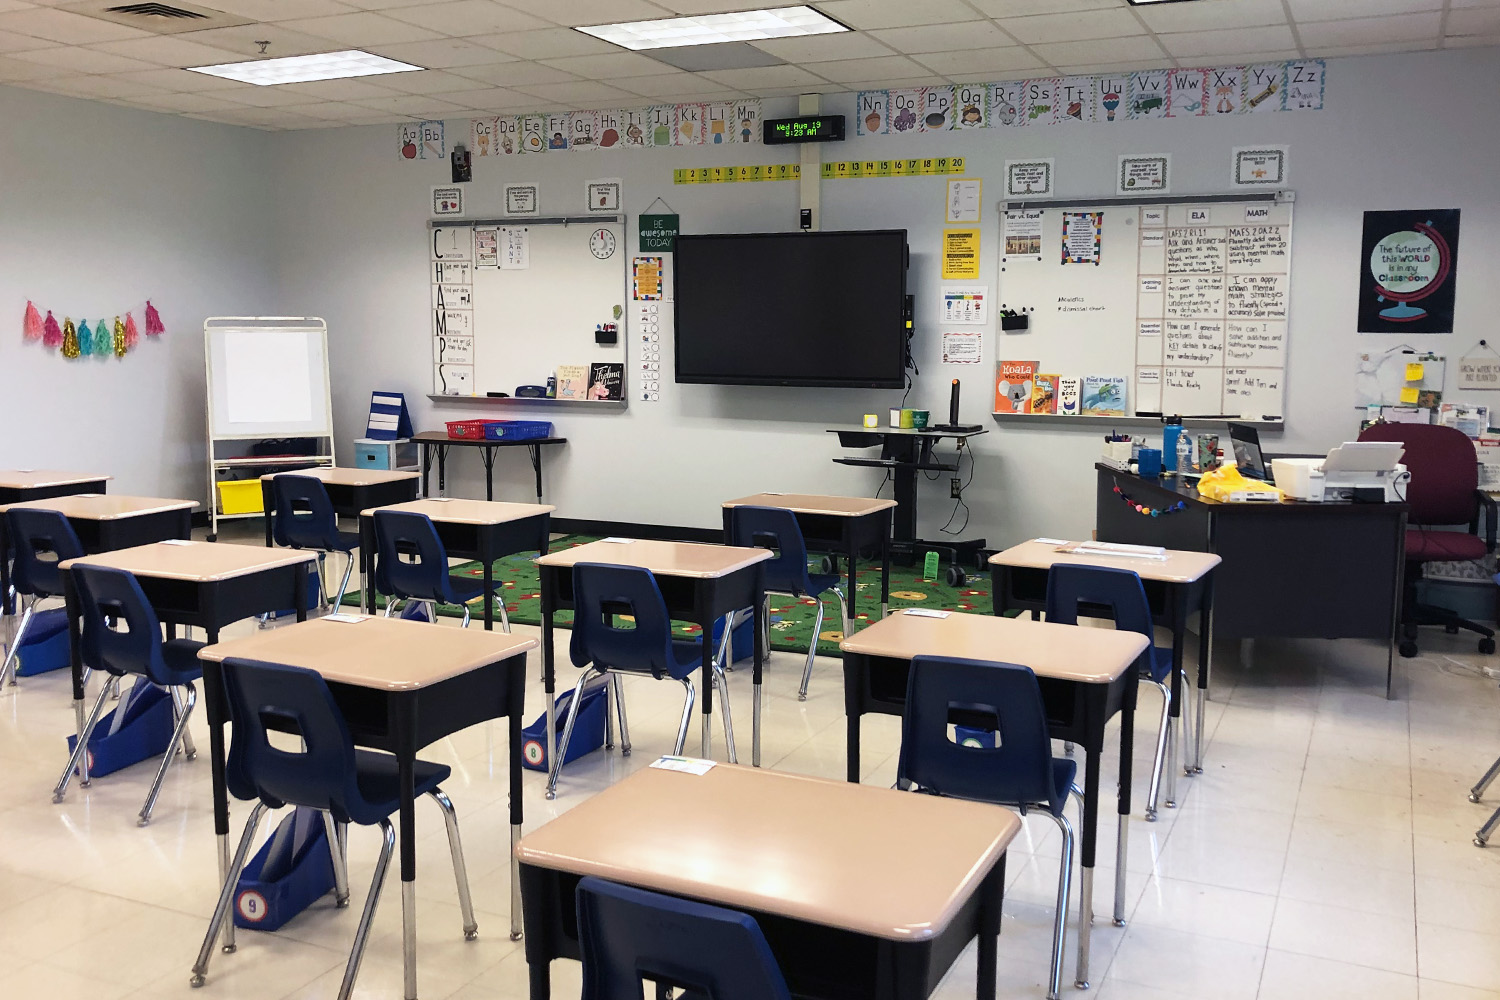 Elementary school classroom with desks, chairs, and wall-mounted T.V.